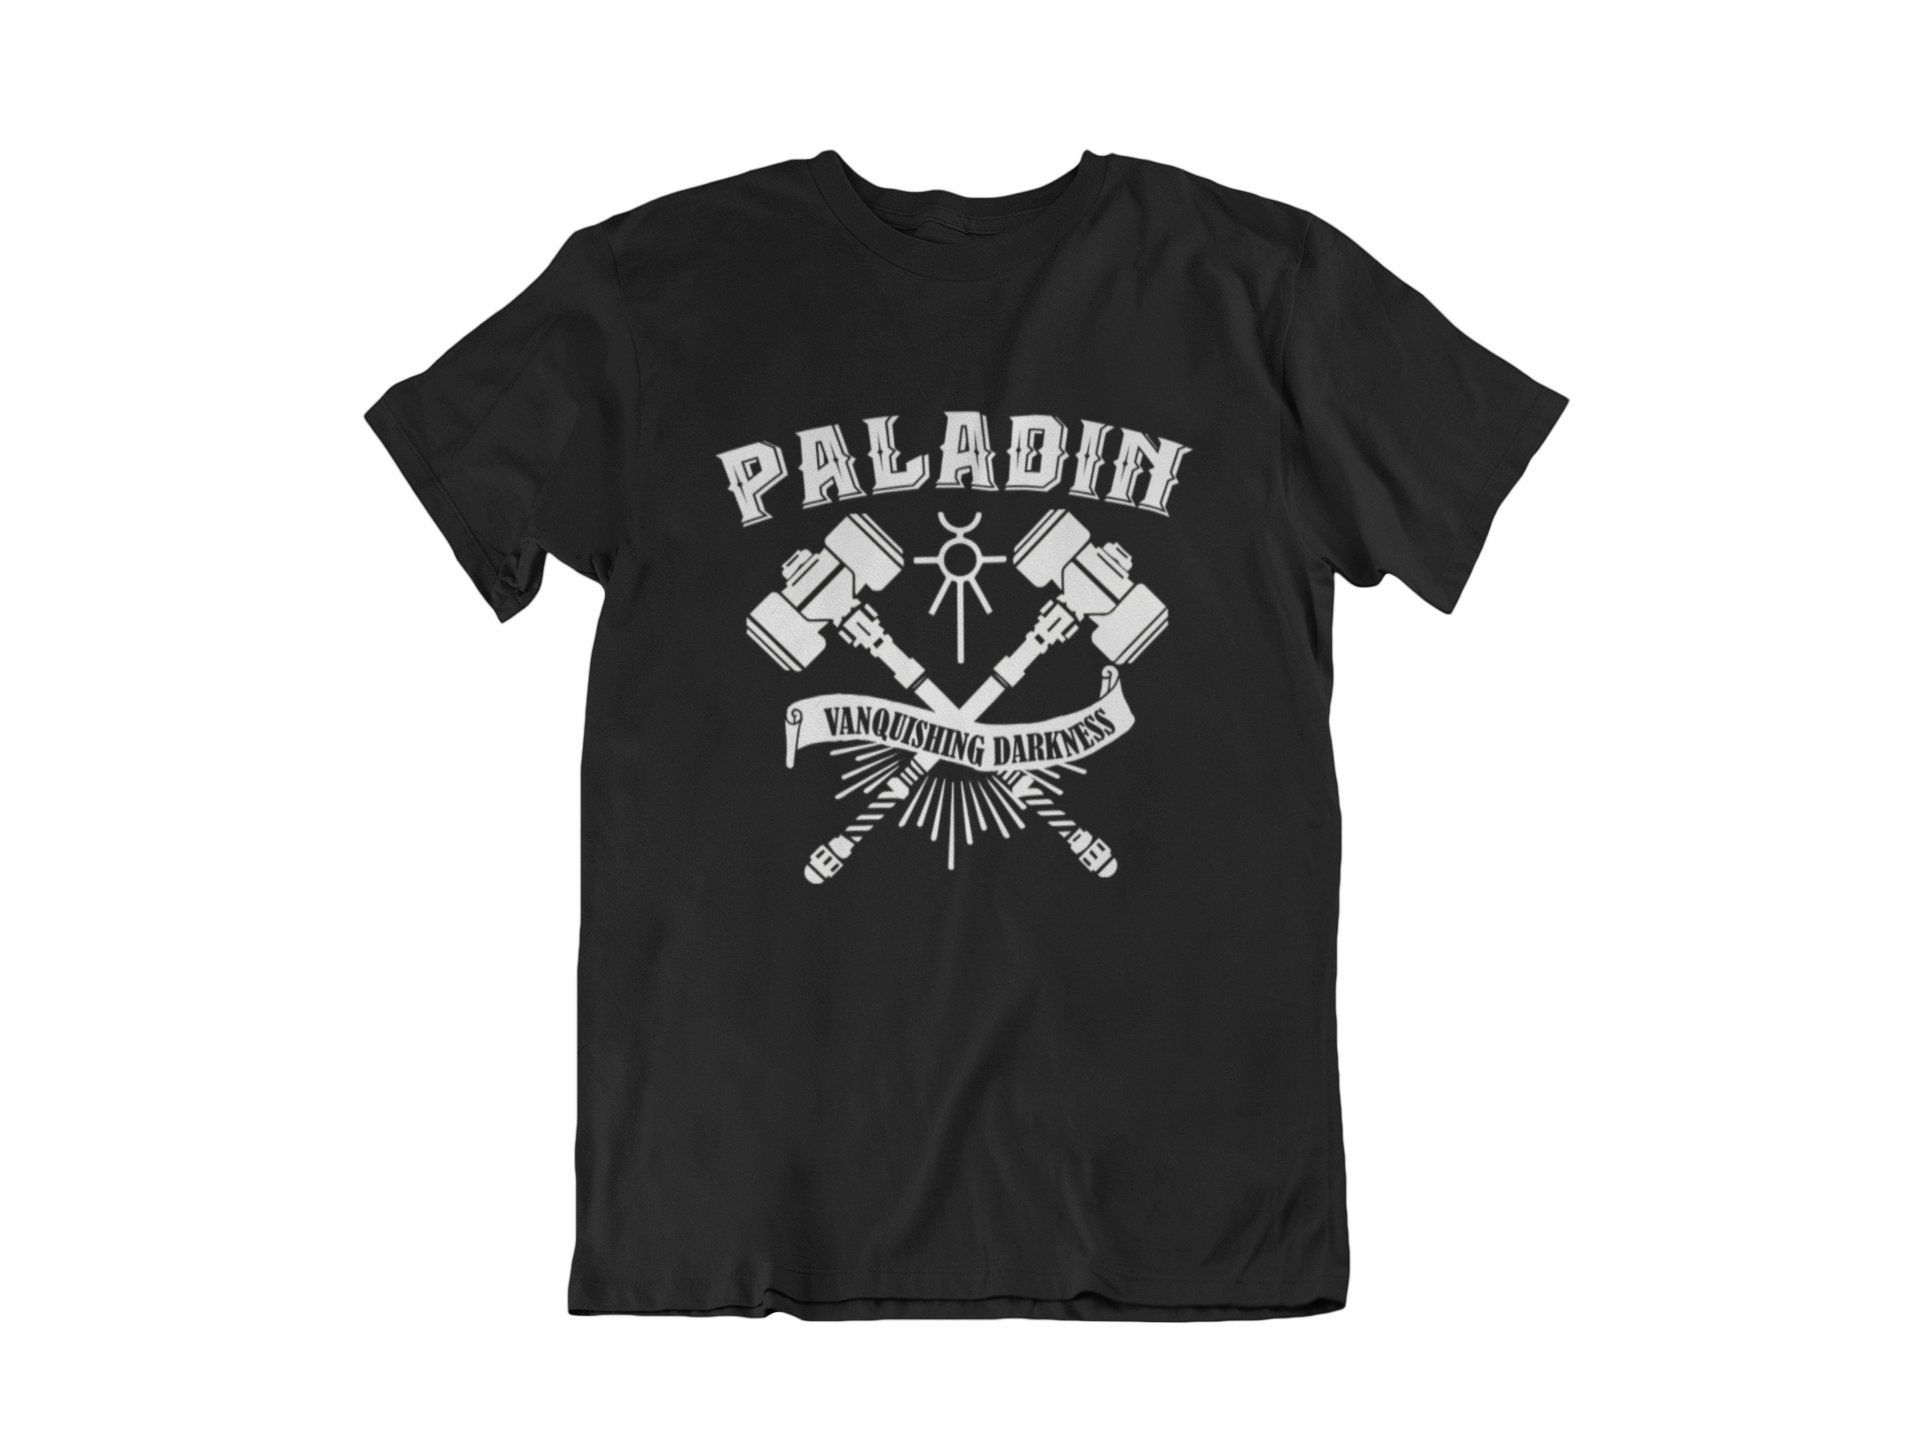 Paladin Dungeons And Dragons Inspired Design Shirt